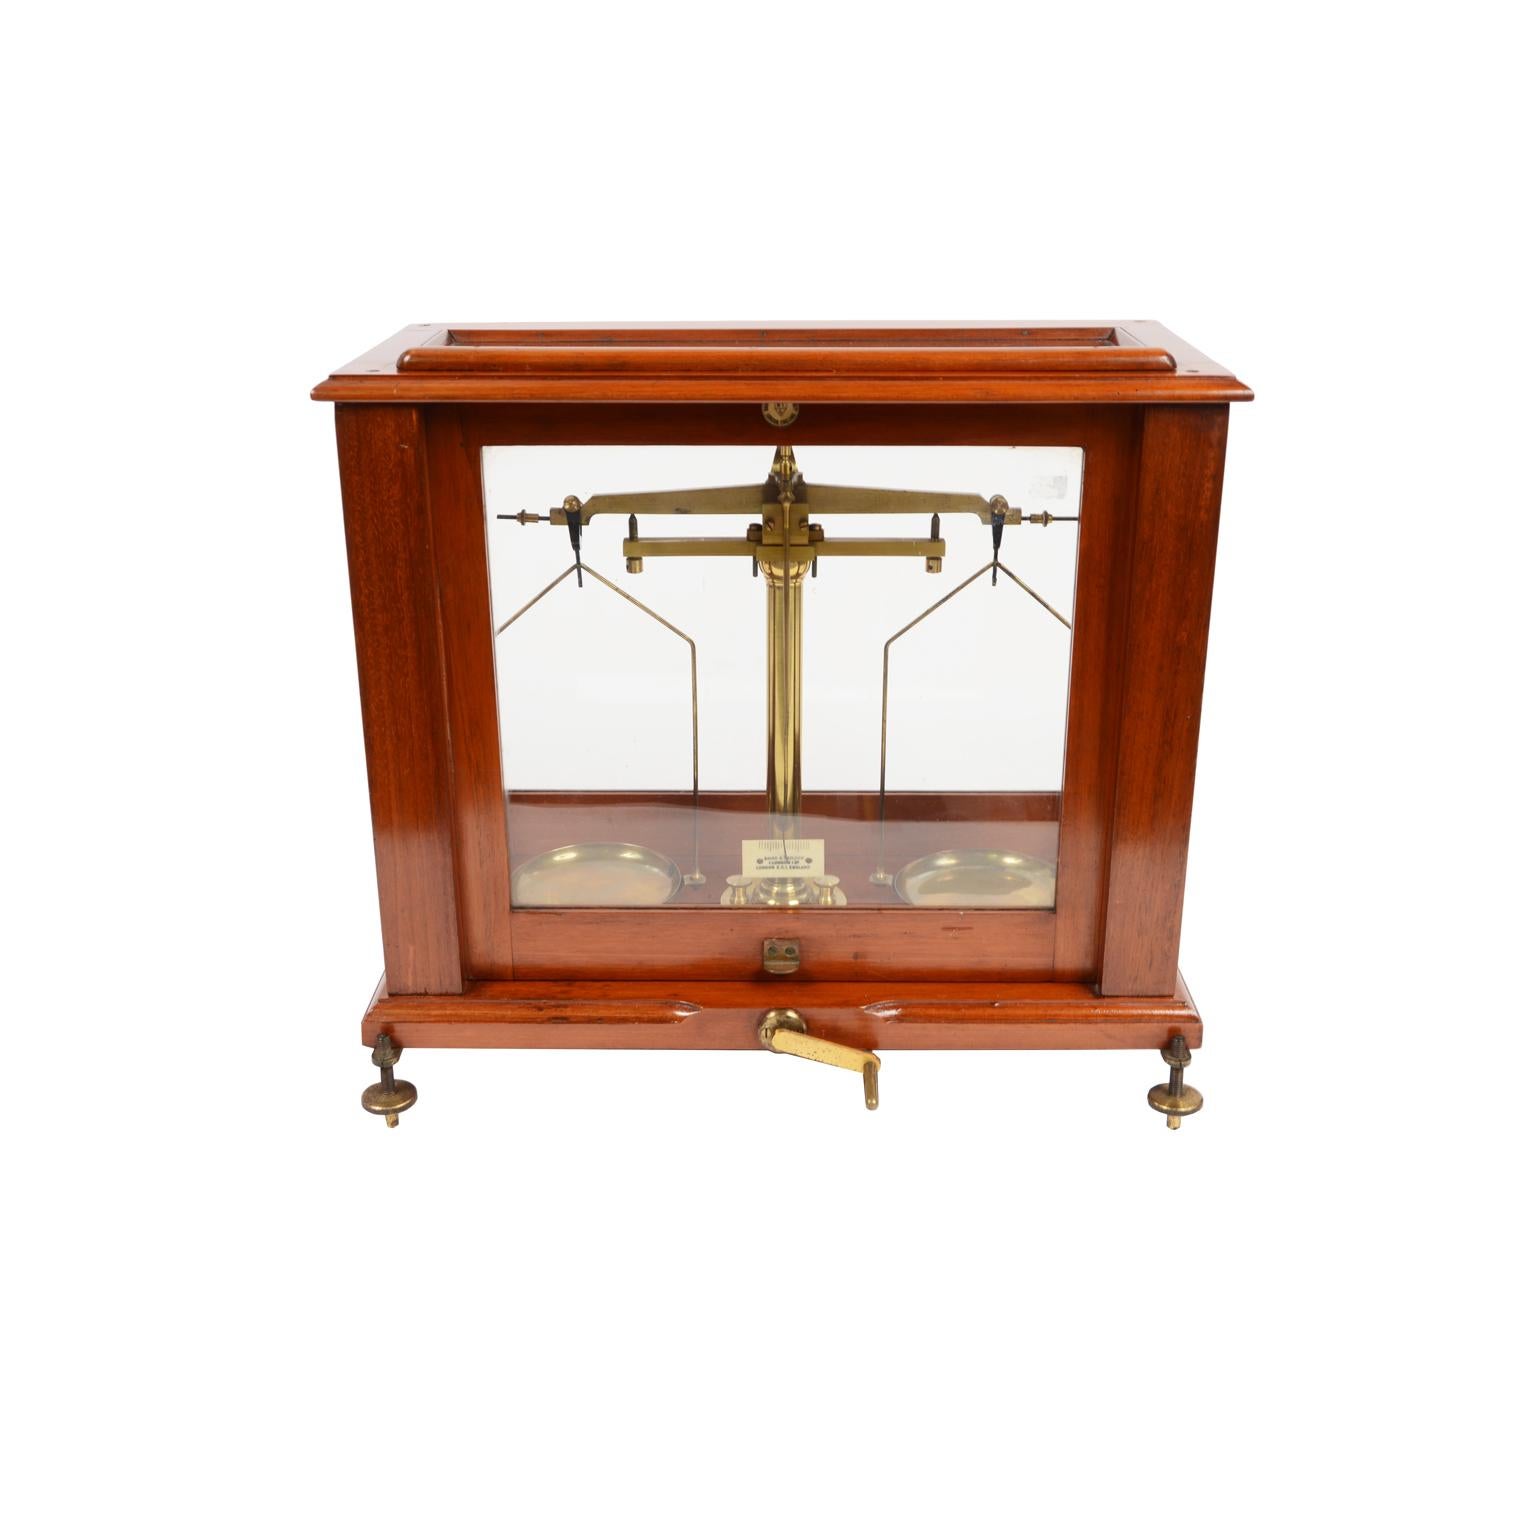 Precision pharmaceutical laboratory scale signed Baird & Tatlock BTL London England from 1910 for galenic preparations with brass weights from 1-2-5-10-20-50-100 grams, as well as numerous foil weights and tweezers, in the its box in mahogany wood.